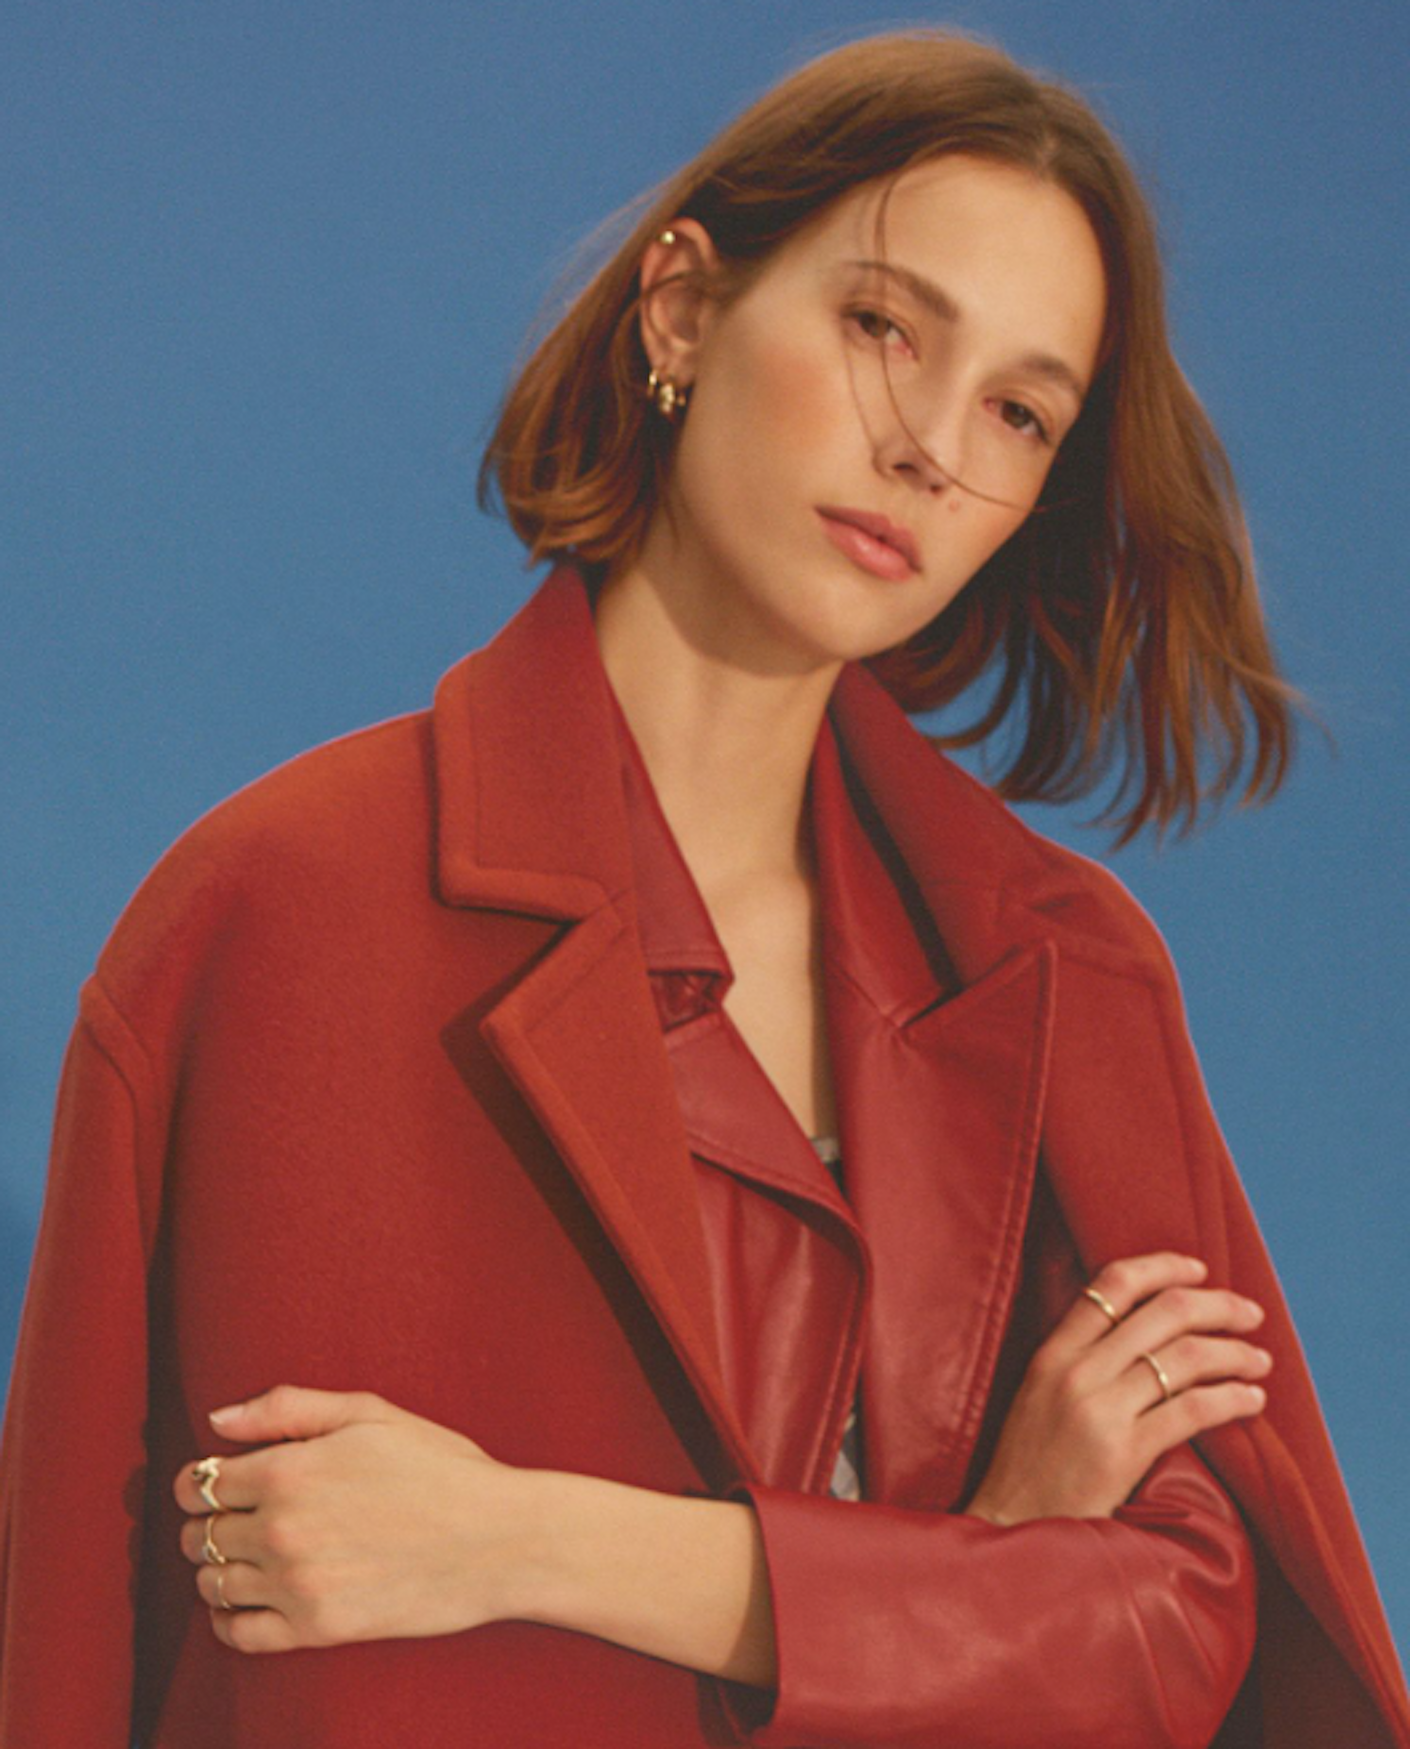 A woman wearing a red blazer crosses her arms and stares at the camera.